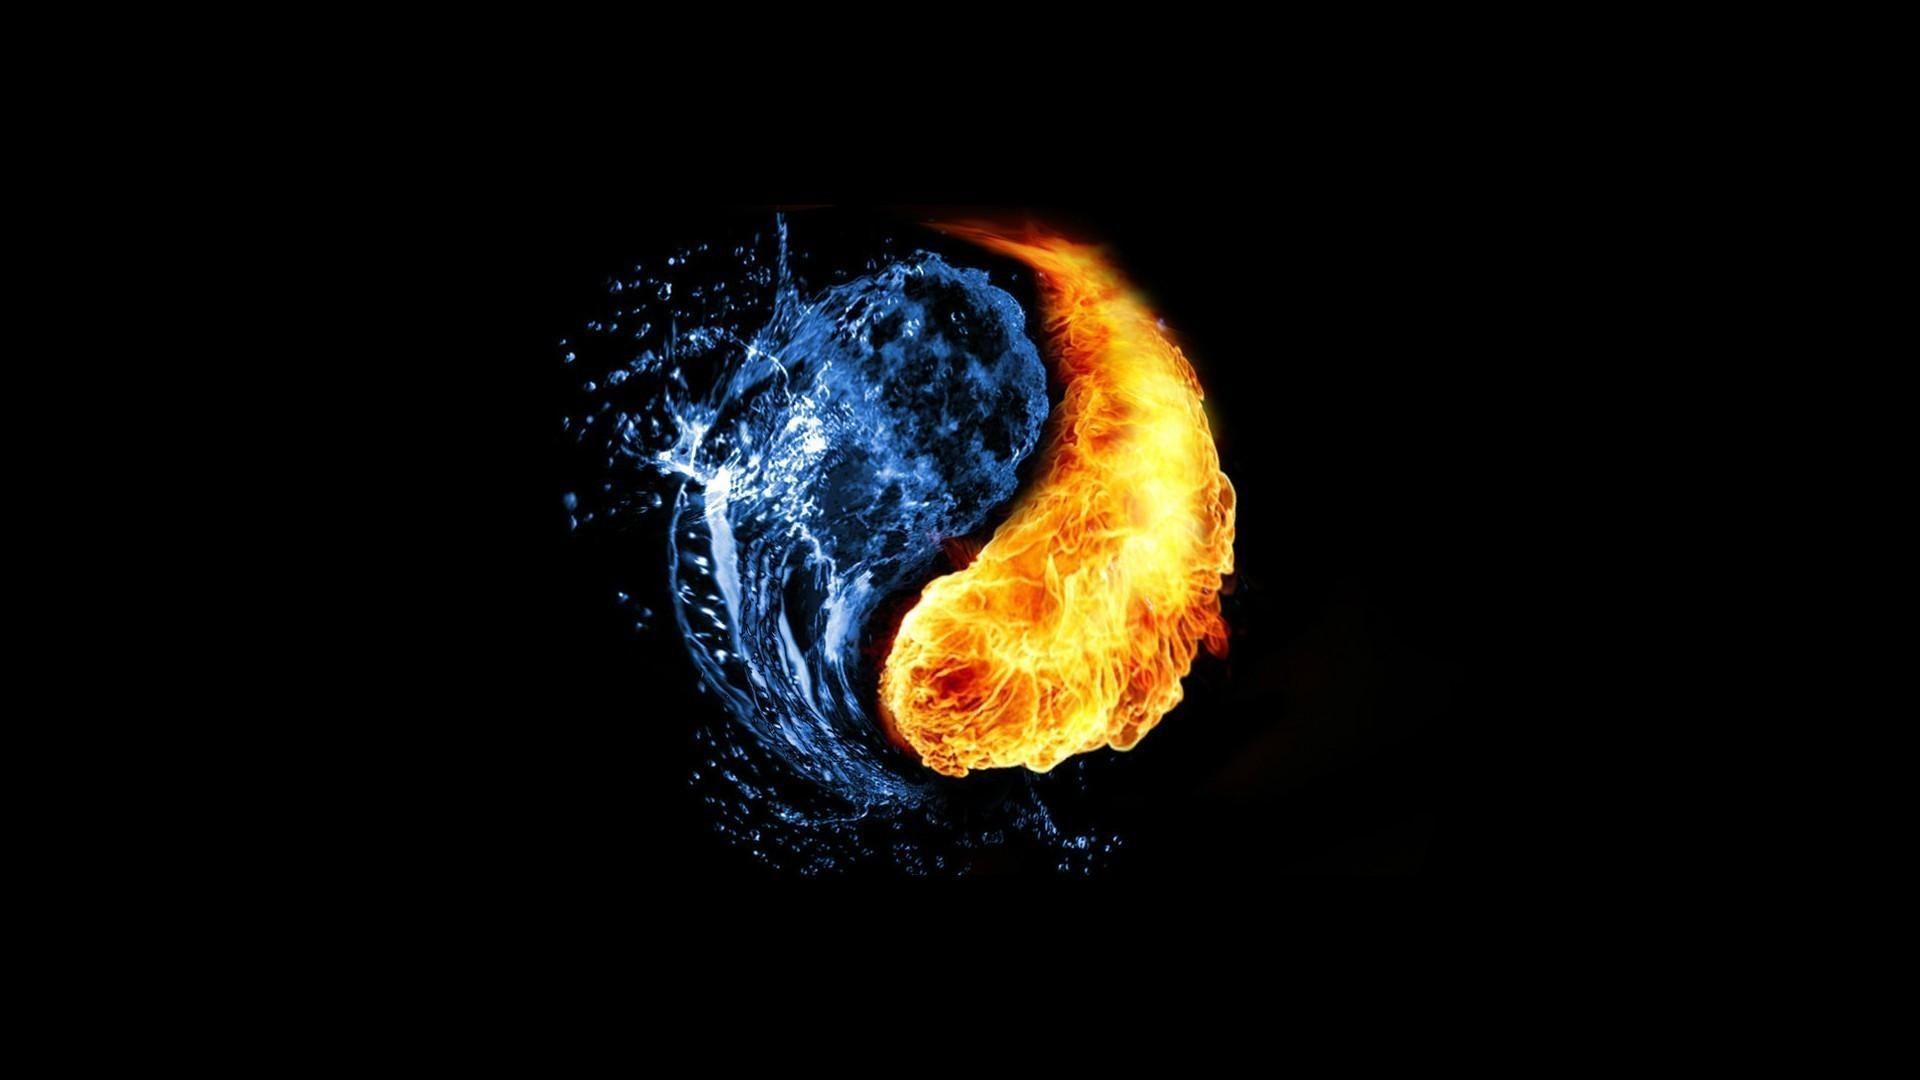 Abstract black background fire photo manipulation water wallpaper